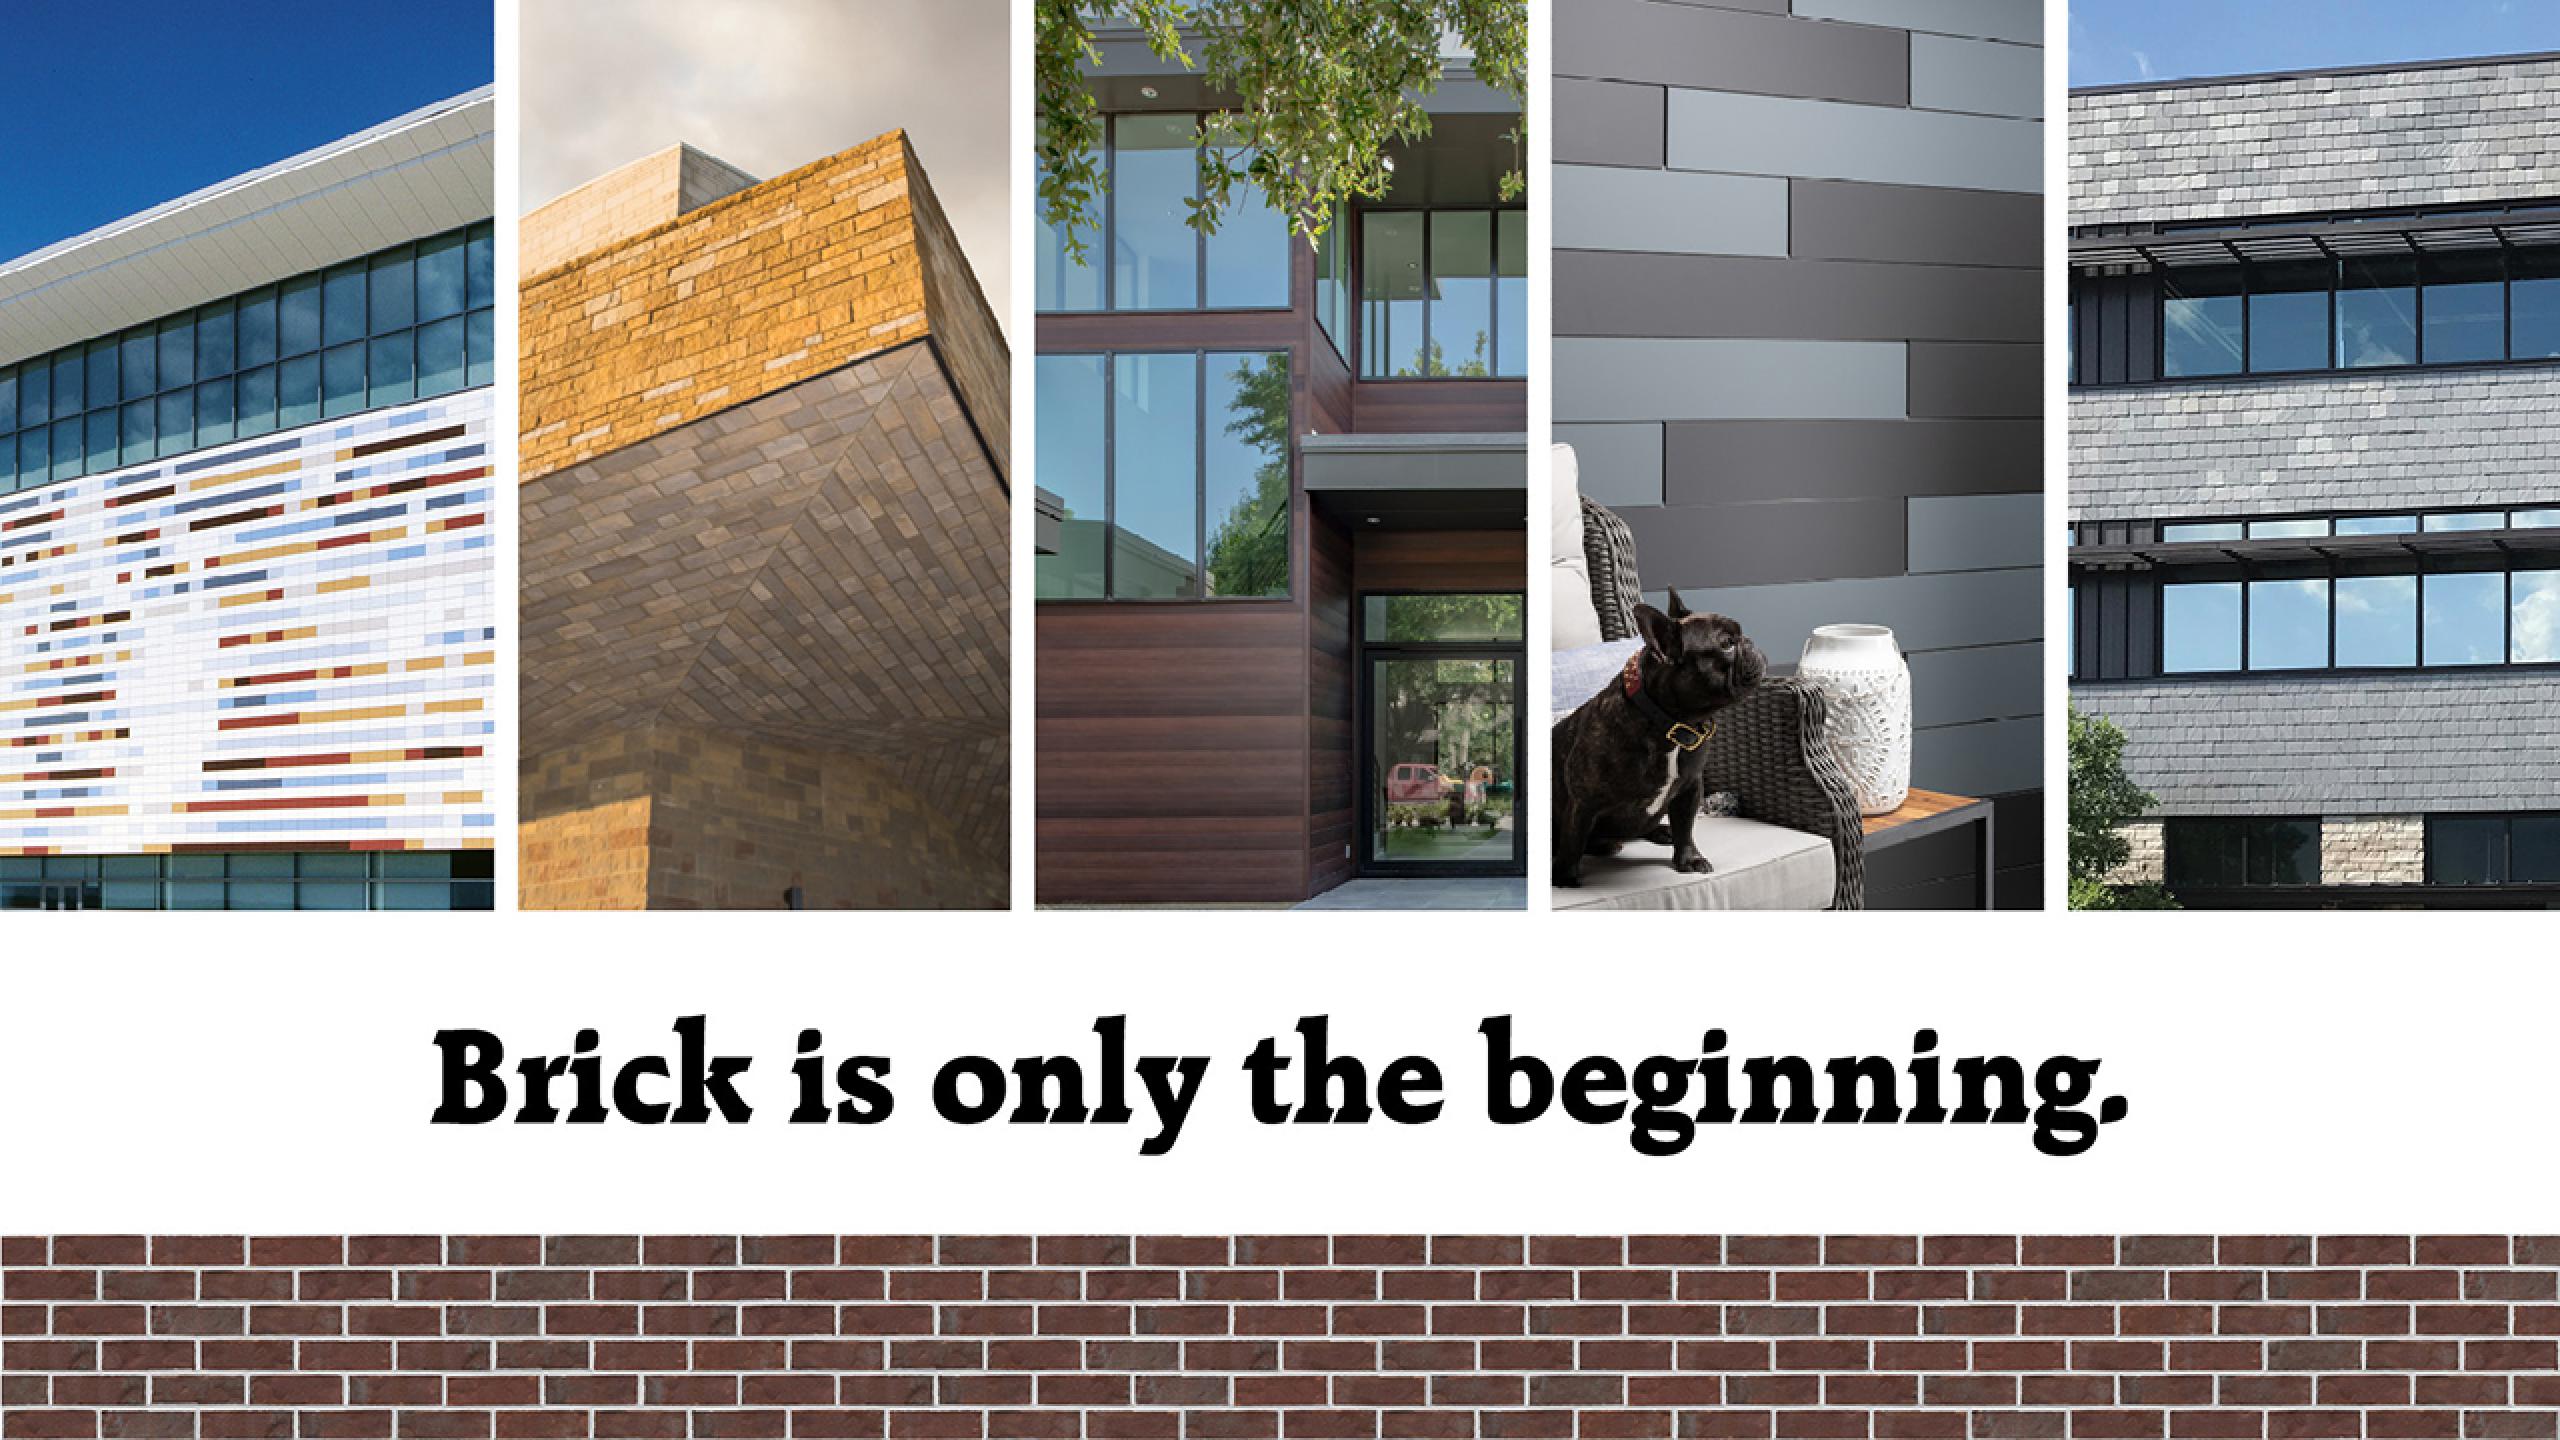 How to Add Decor on Brick Without Drilling - Men's Journal